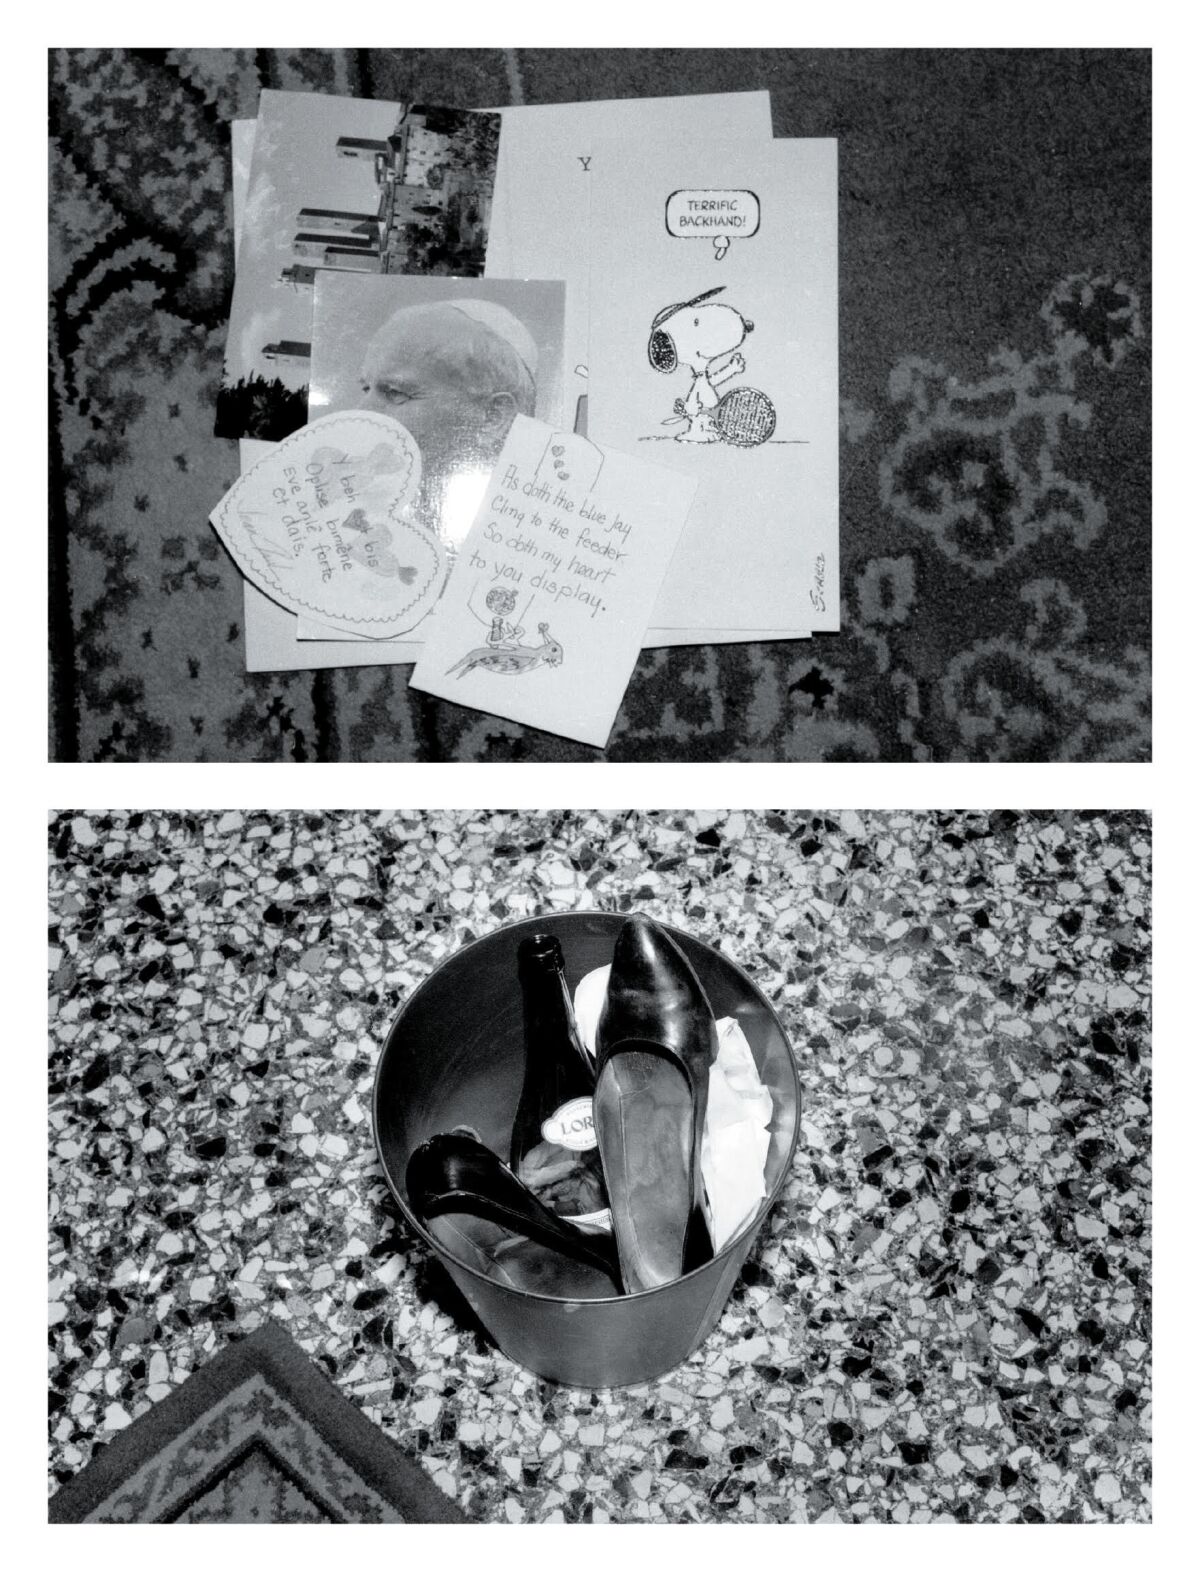 Black-and-white photos in a hotel room show greeting cards and a trash can with a guest's shoes and banana peels.